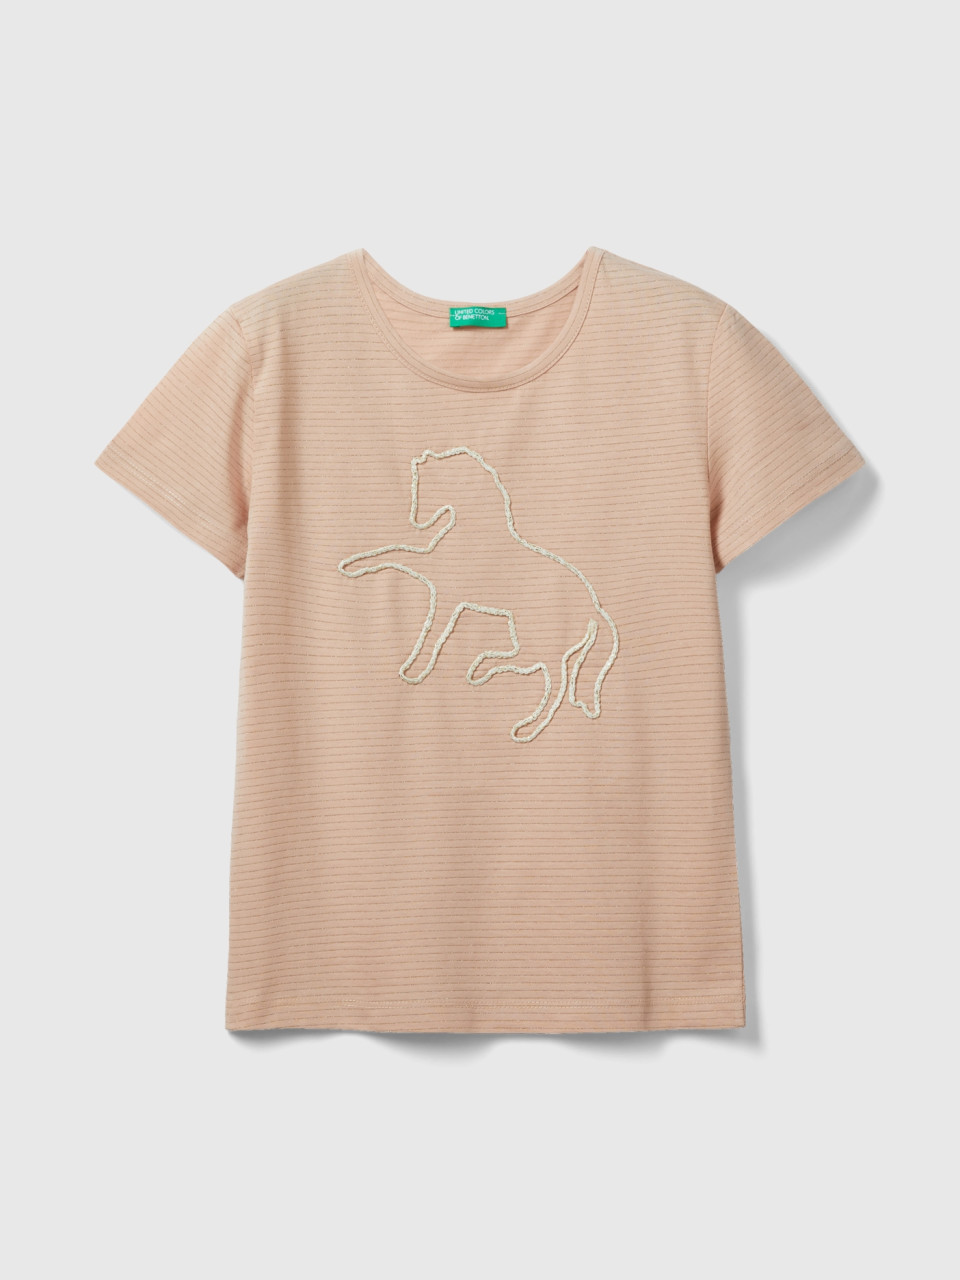 Benetton, T-shirt With Cord Embroidery, Nude, Kids